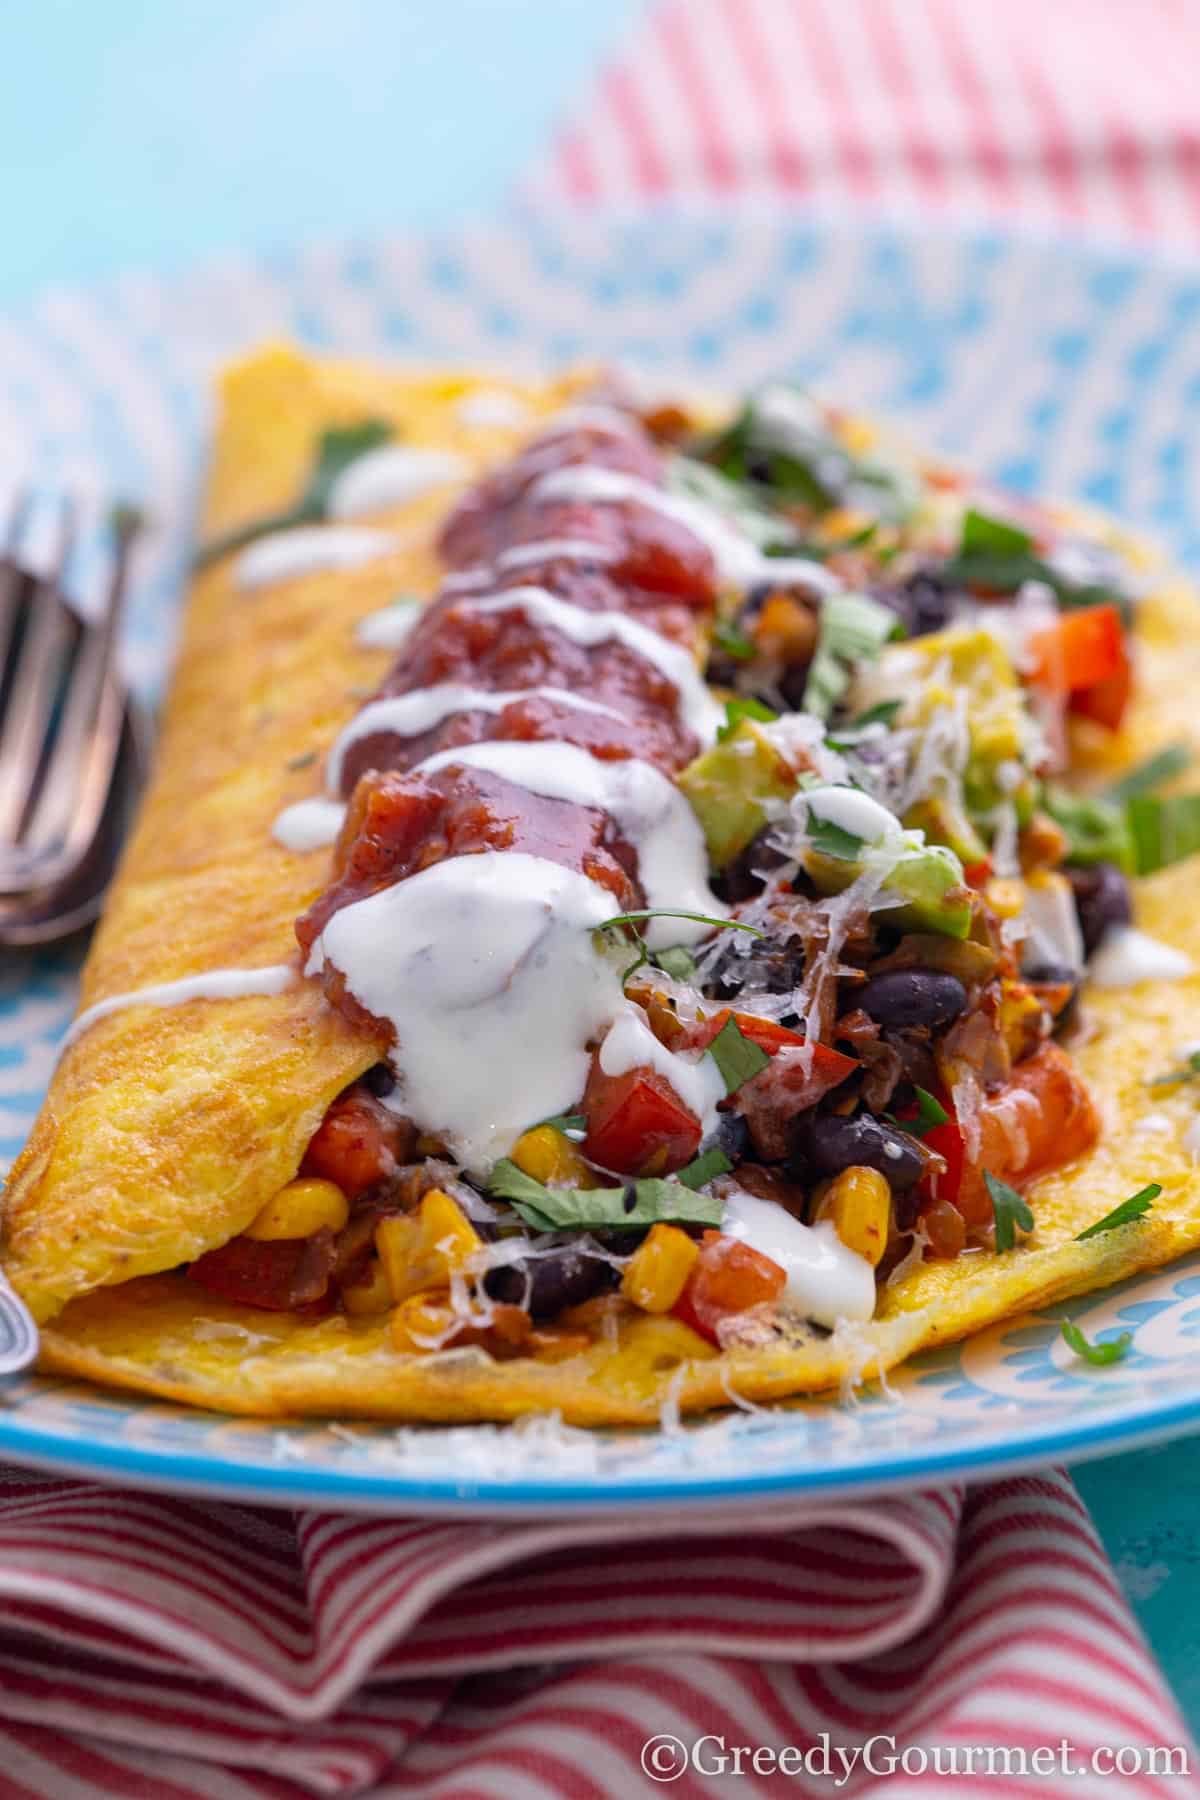 Plate of a mexican style omelette